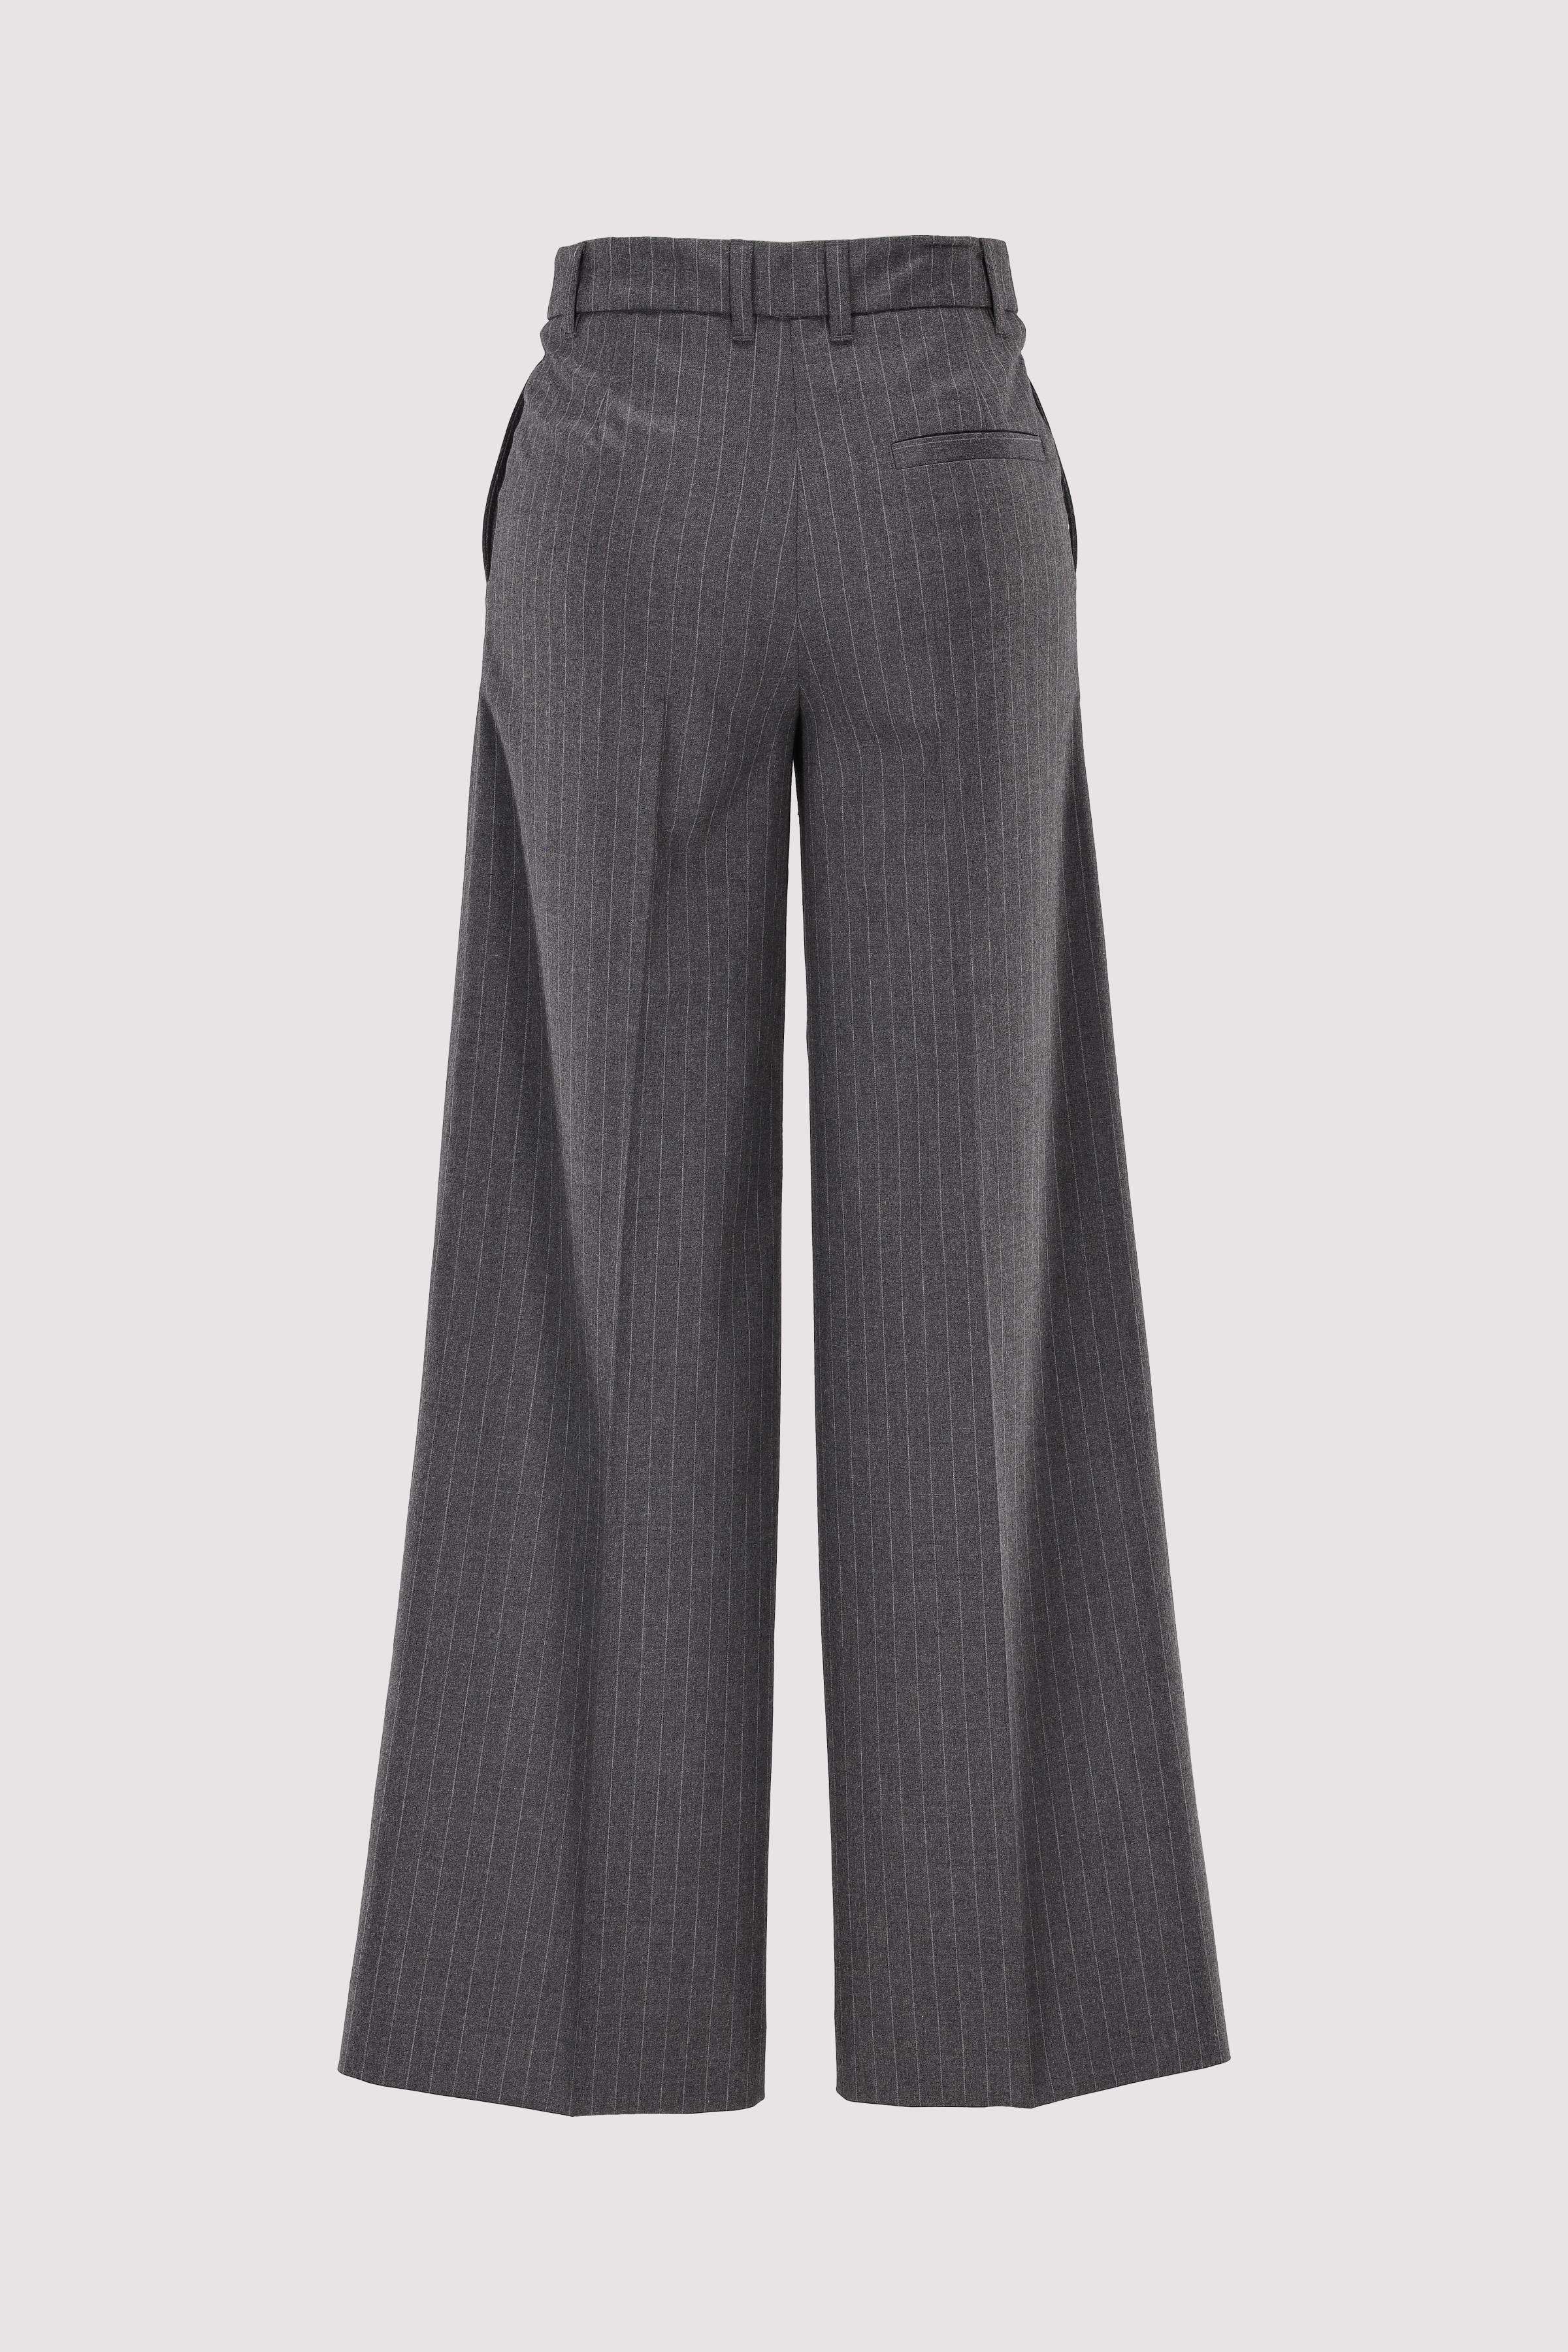 Pants, modern suiting style, w